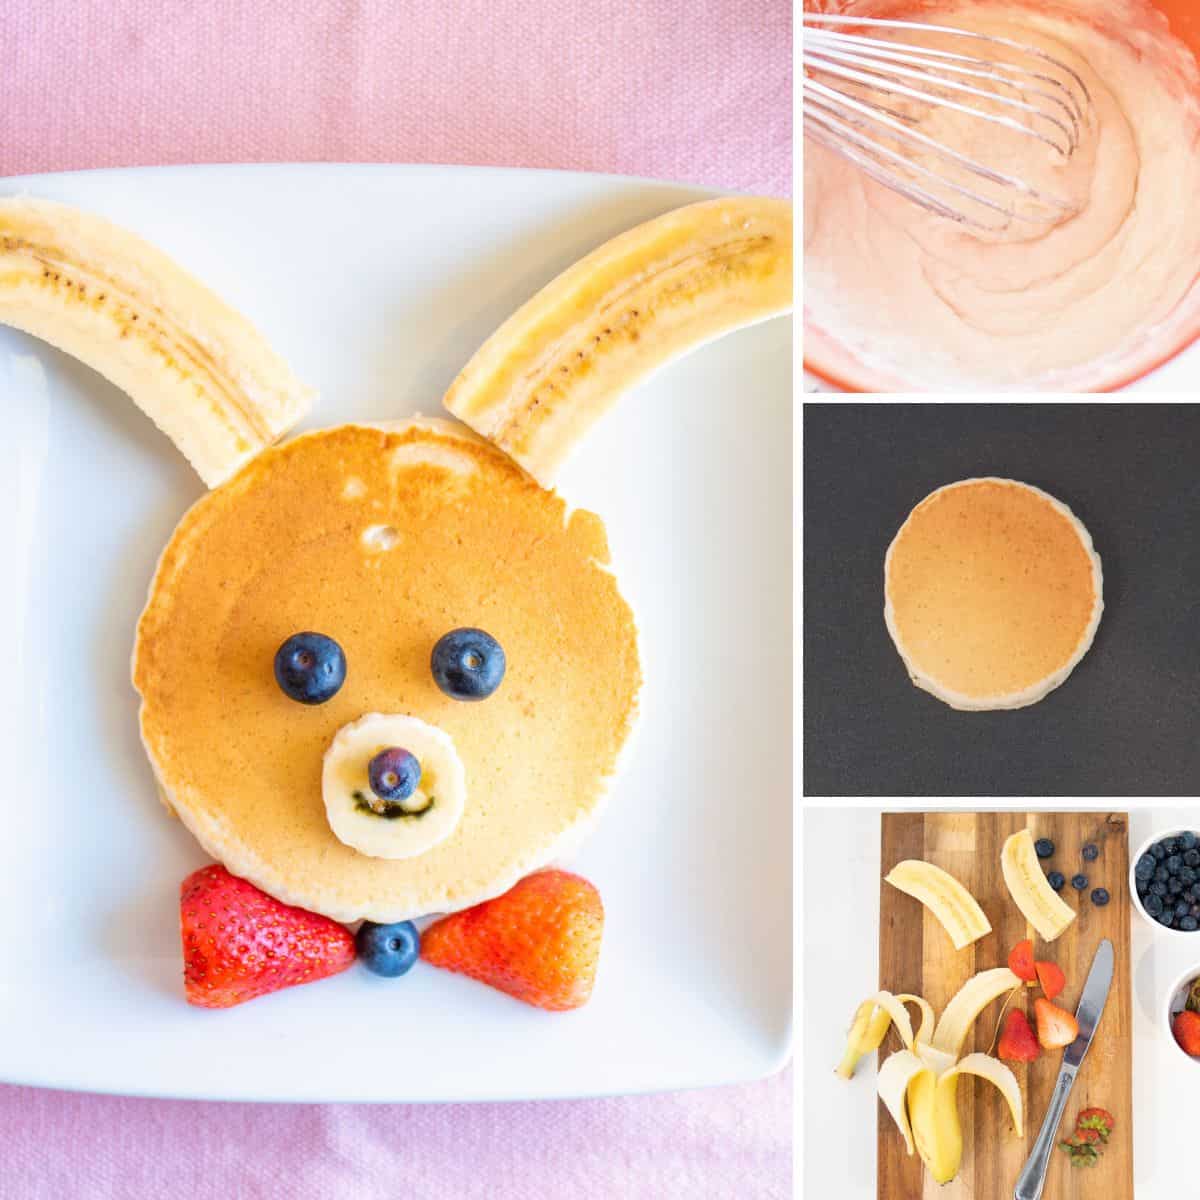 Collage with photos of mixing pancake batter, pancake on griddle, sliced strawberries and bananas on cutting board, and completed bunny face pancake.